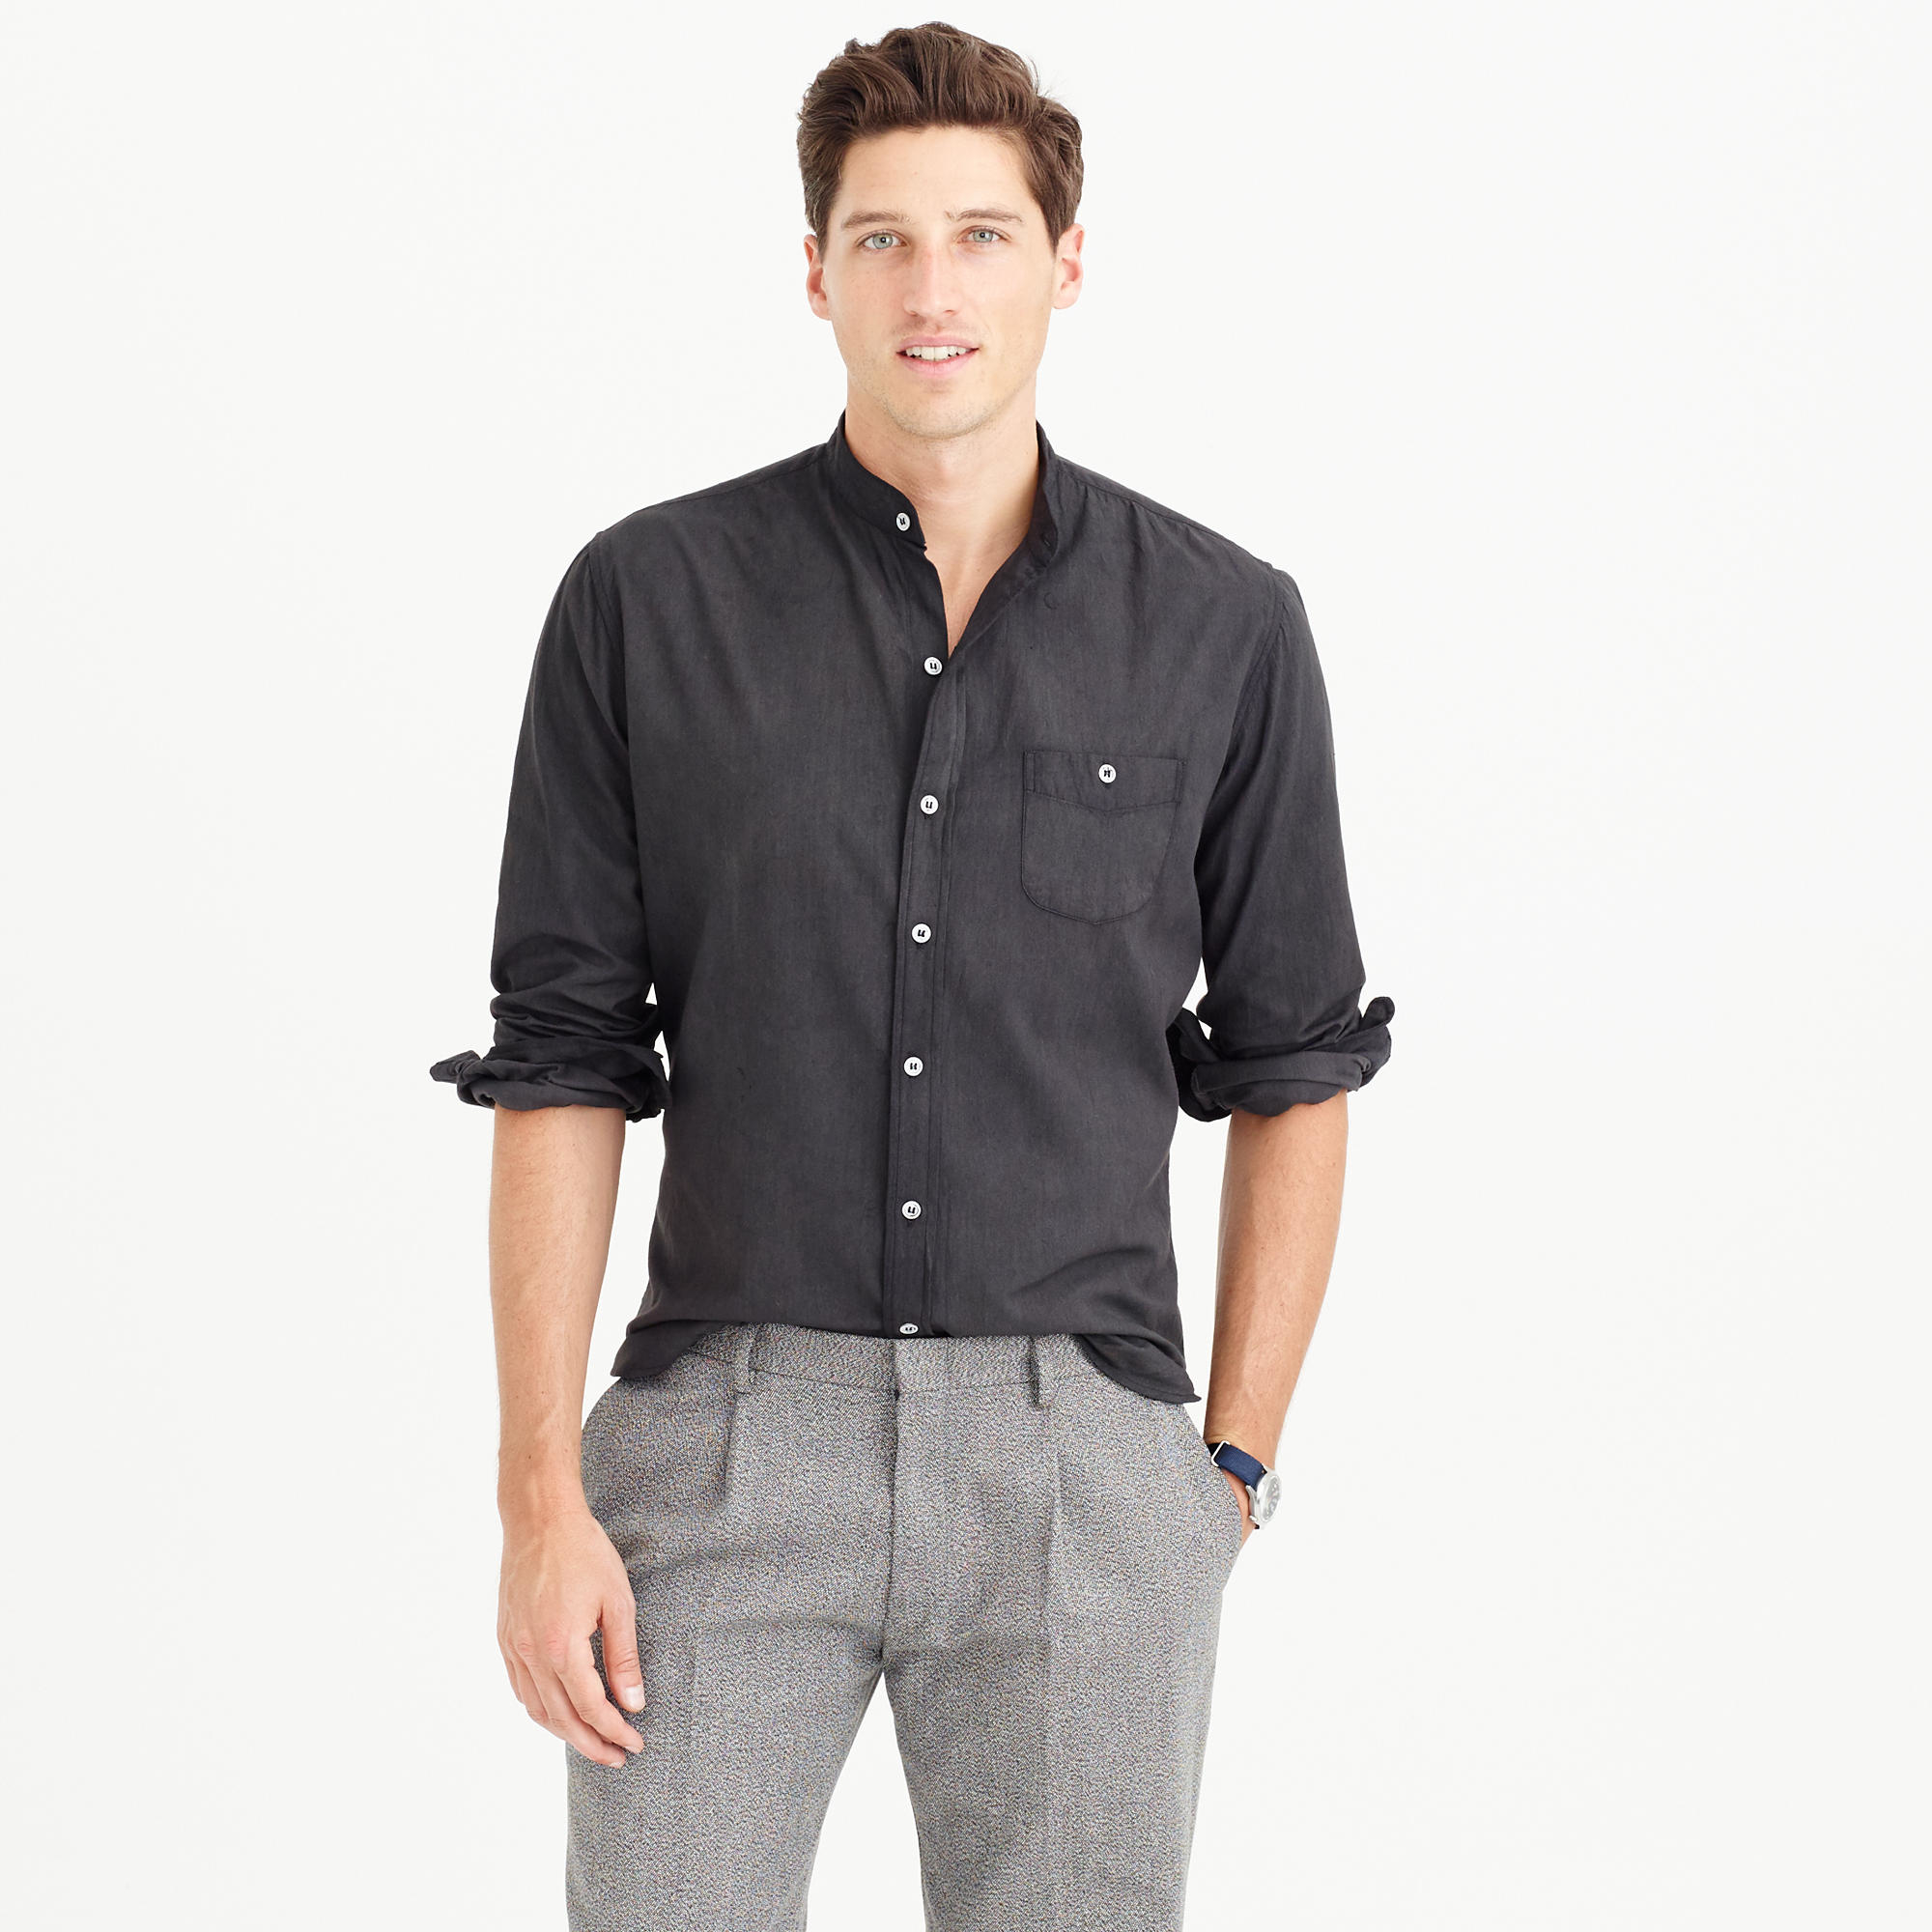 Lyst - Industry of All Nations Madras Shirt in Gray for Men